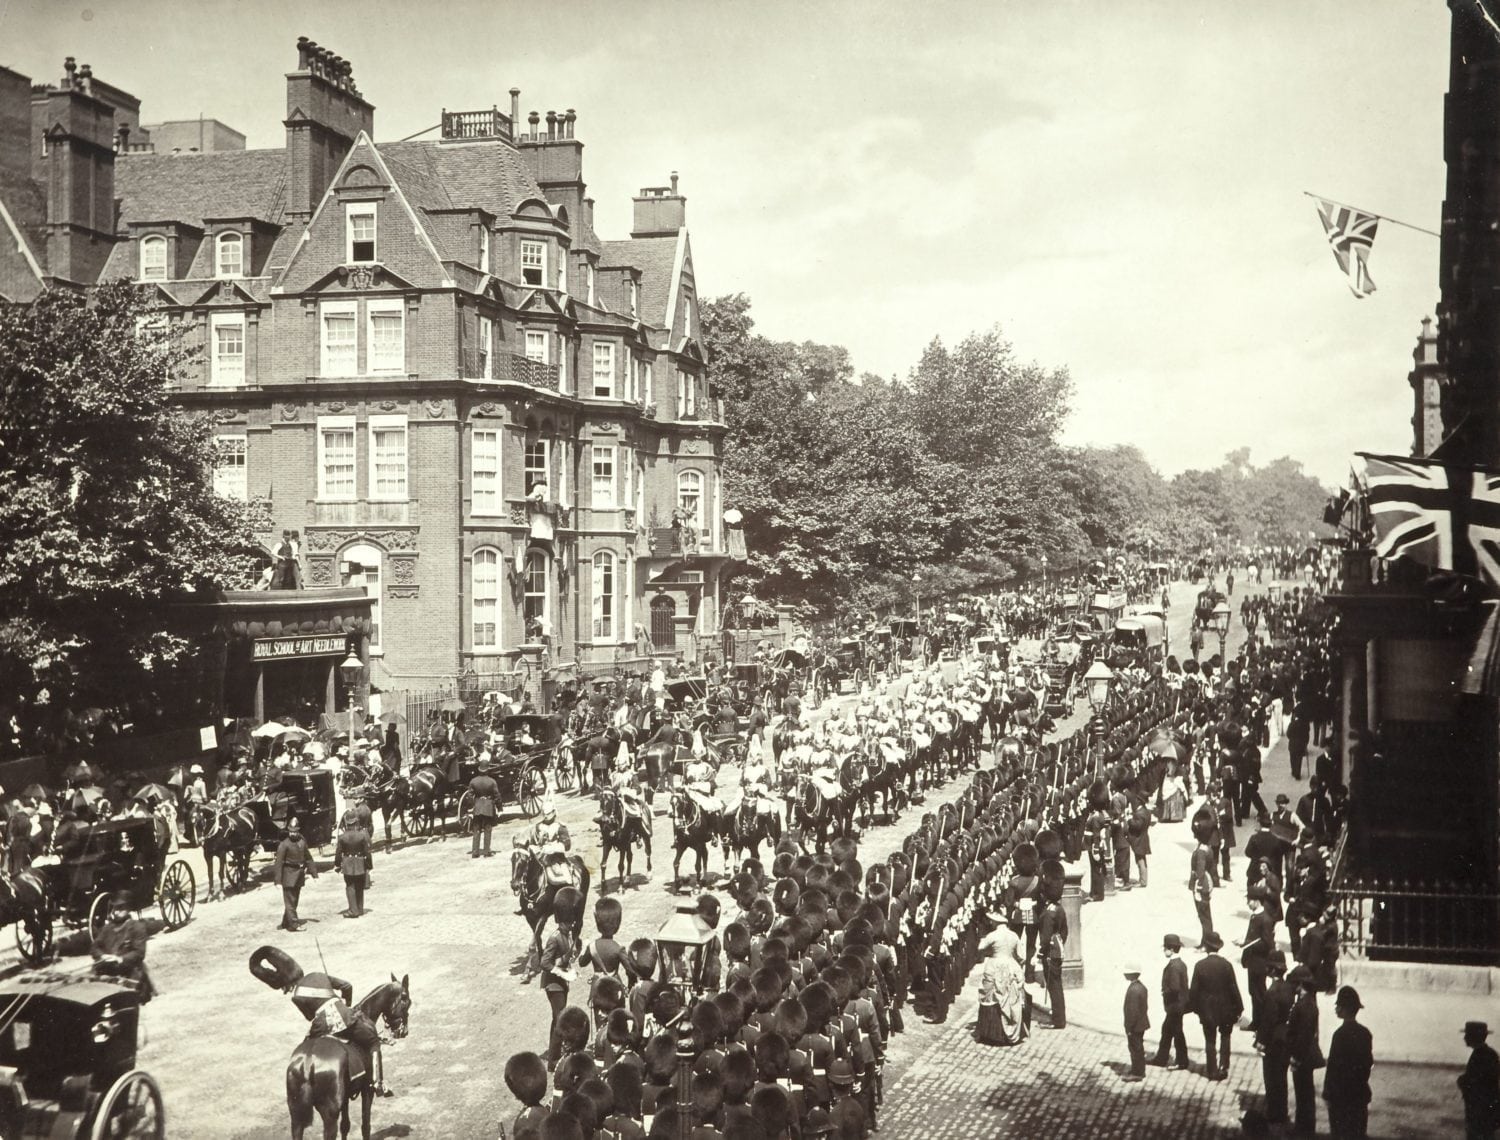 The RSN's first home on Exhibition Road was opened in 1875 by Princess Helena